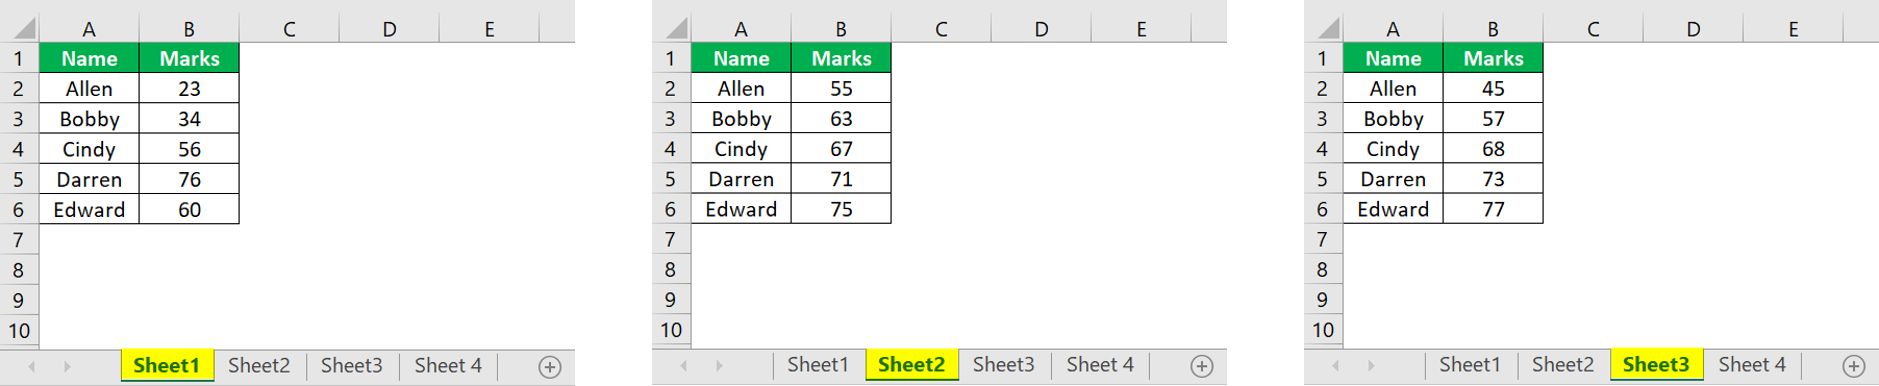 Consolidate Function in Excel - FAQ 1-1